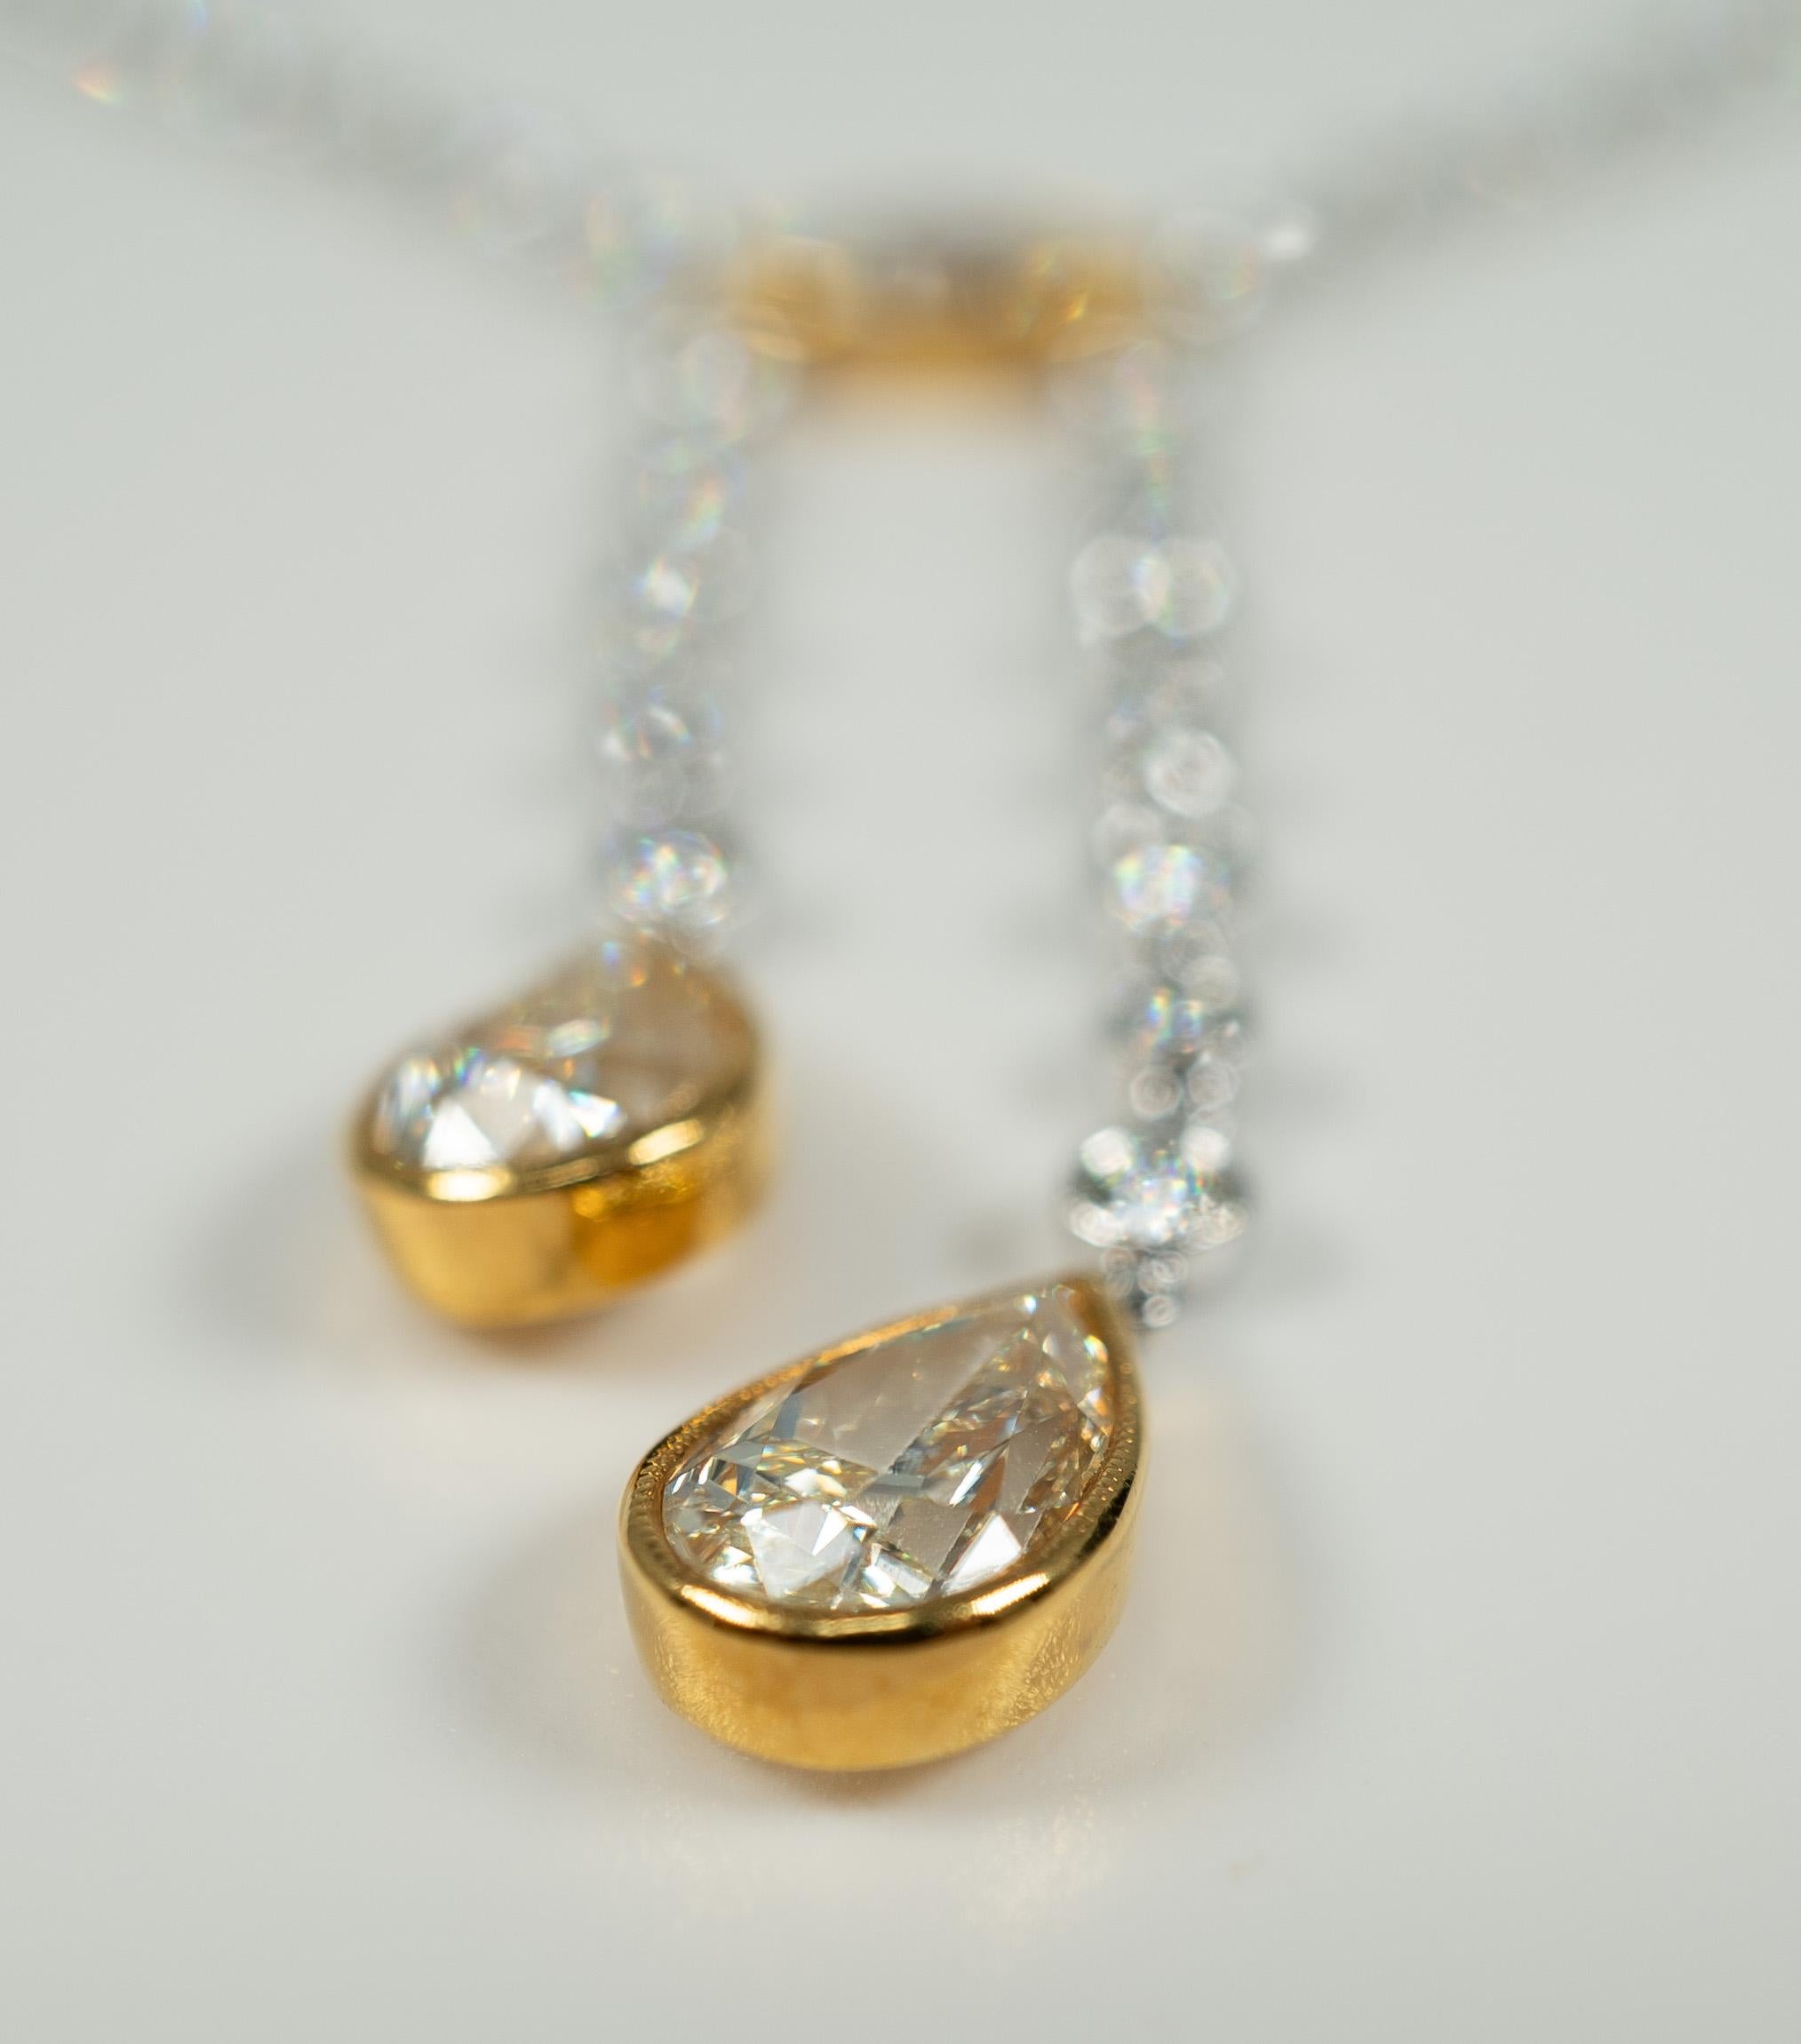 7.25 Carat Diamond Necklace in 18 Karat Gold In Good Condition For Sale In Dallas, TX